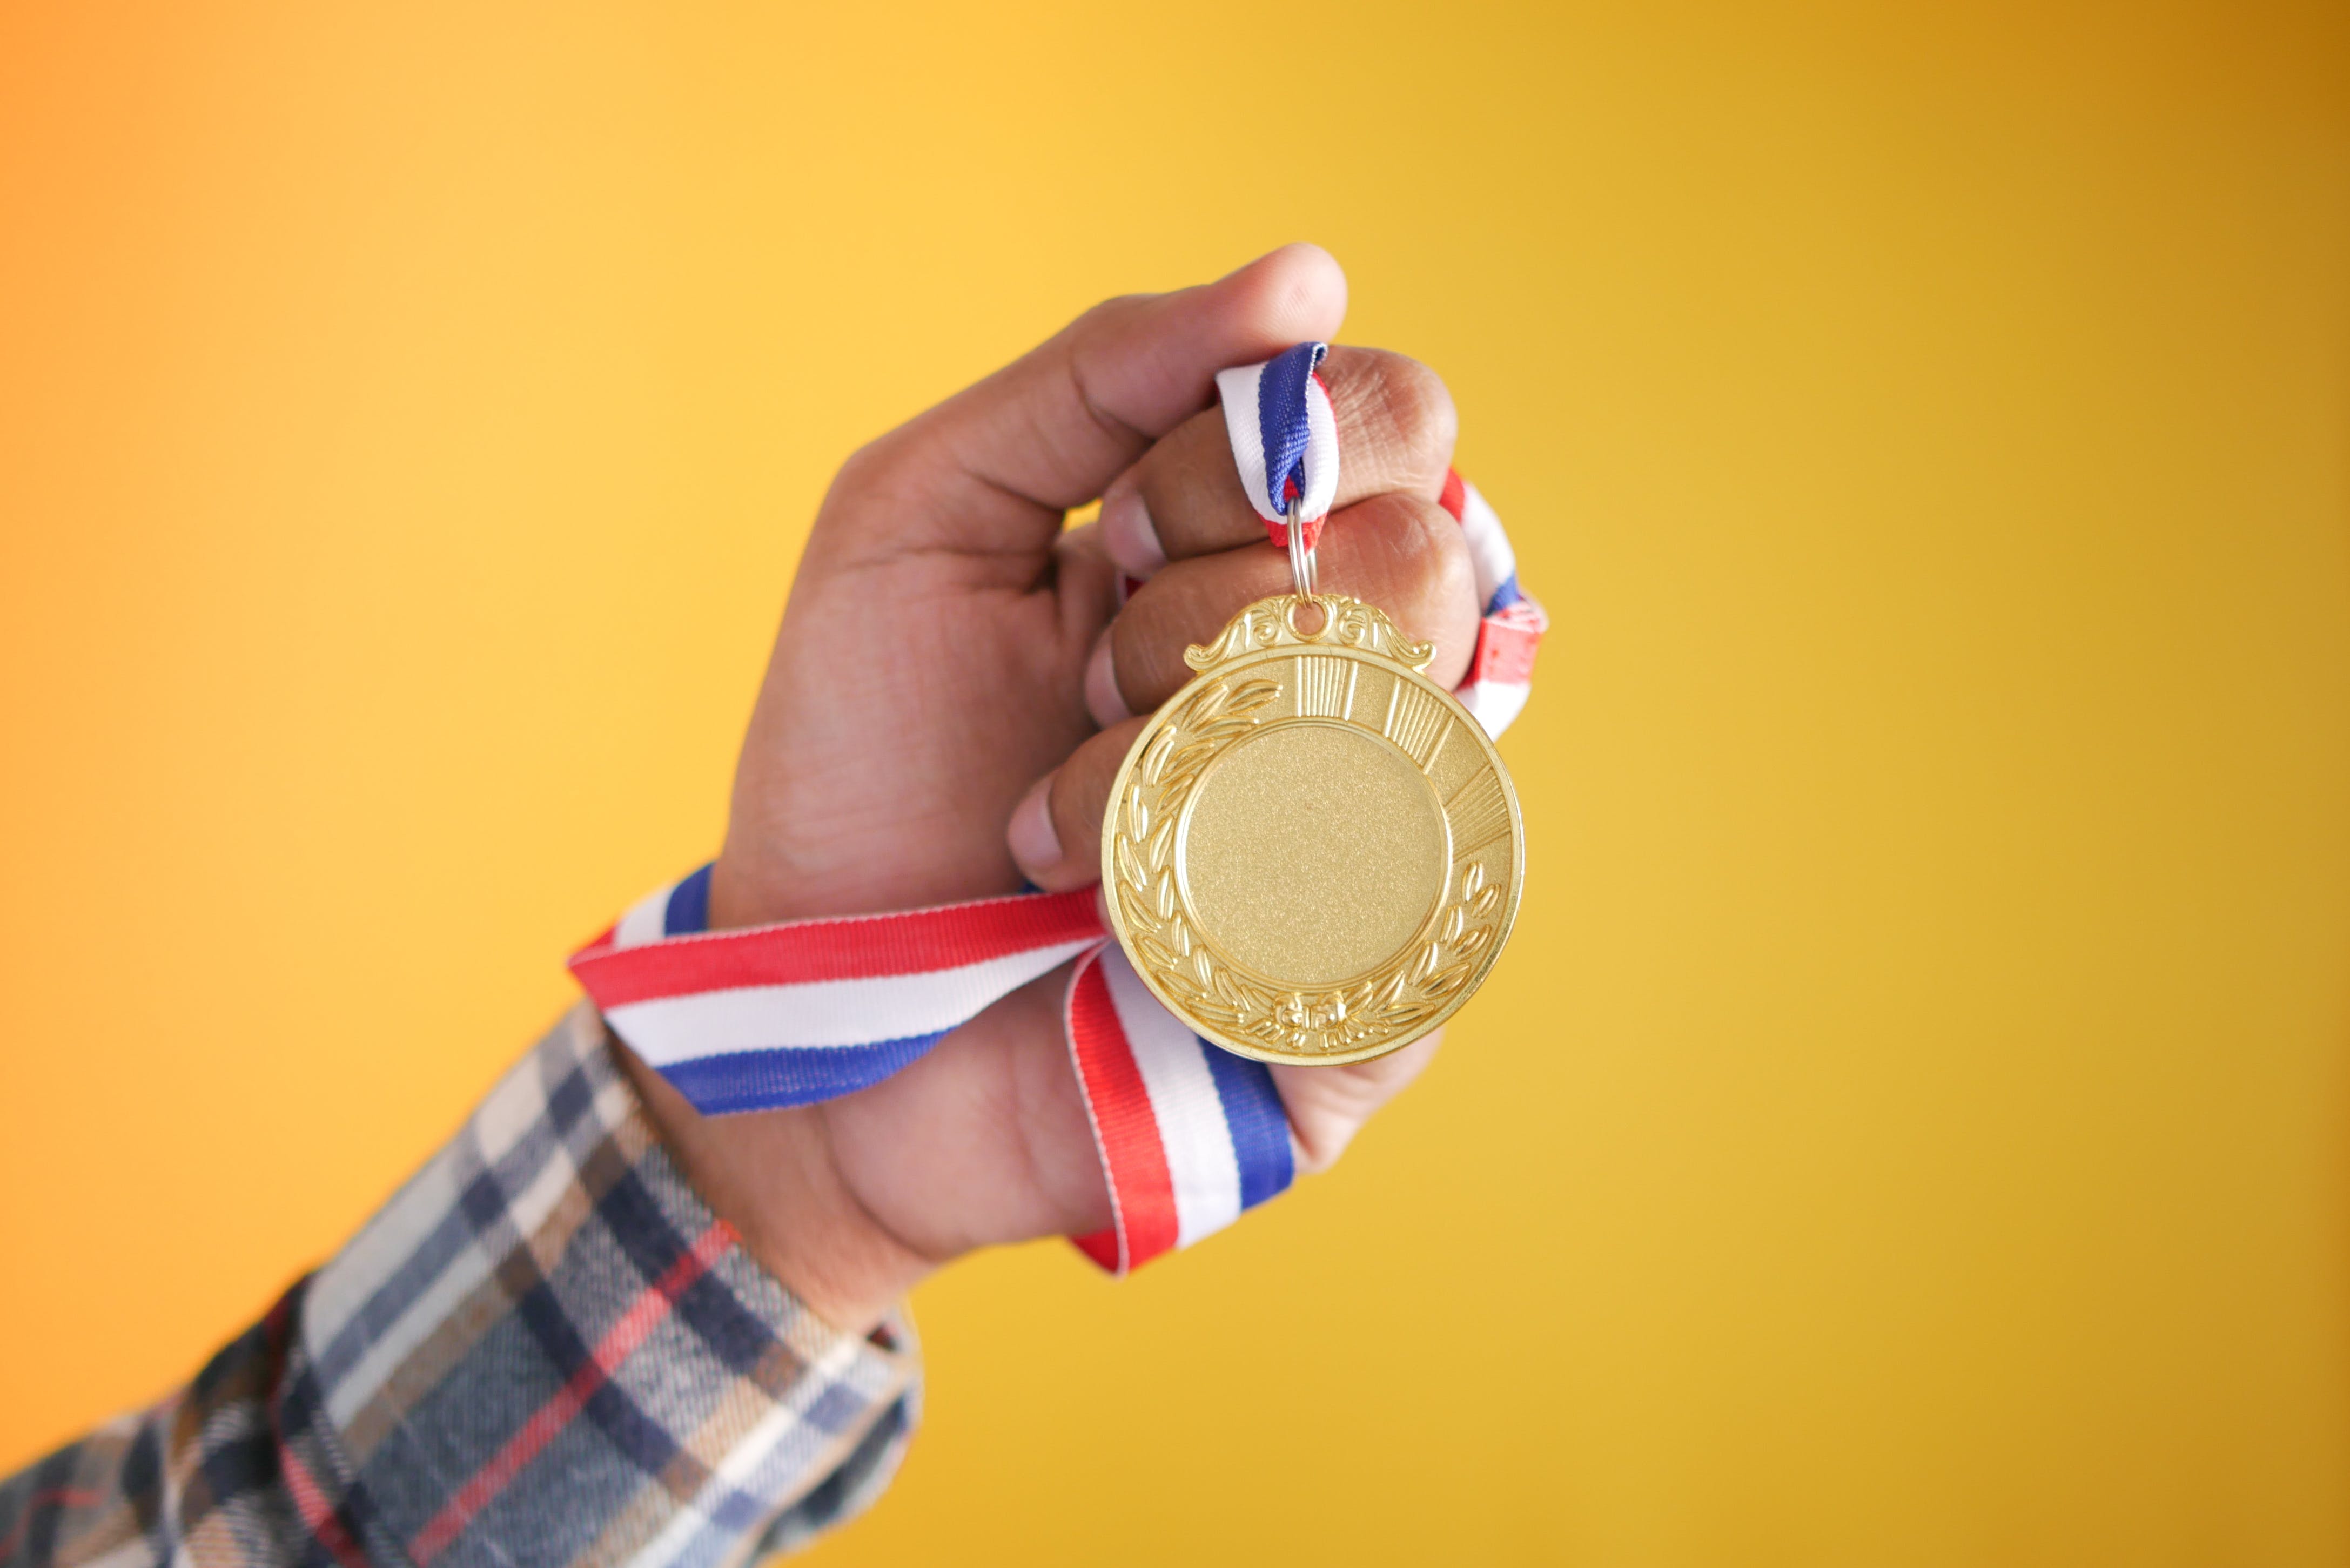 A person holding a medal. | Source: Pexels